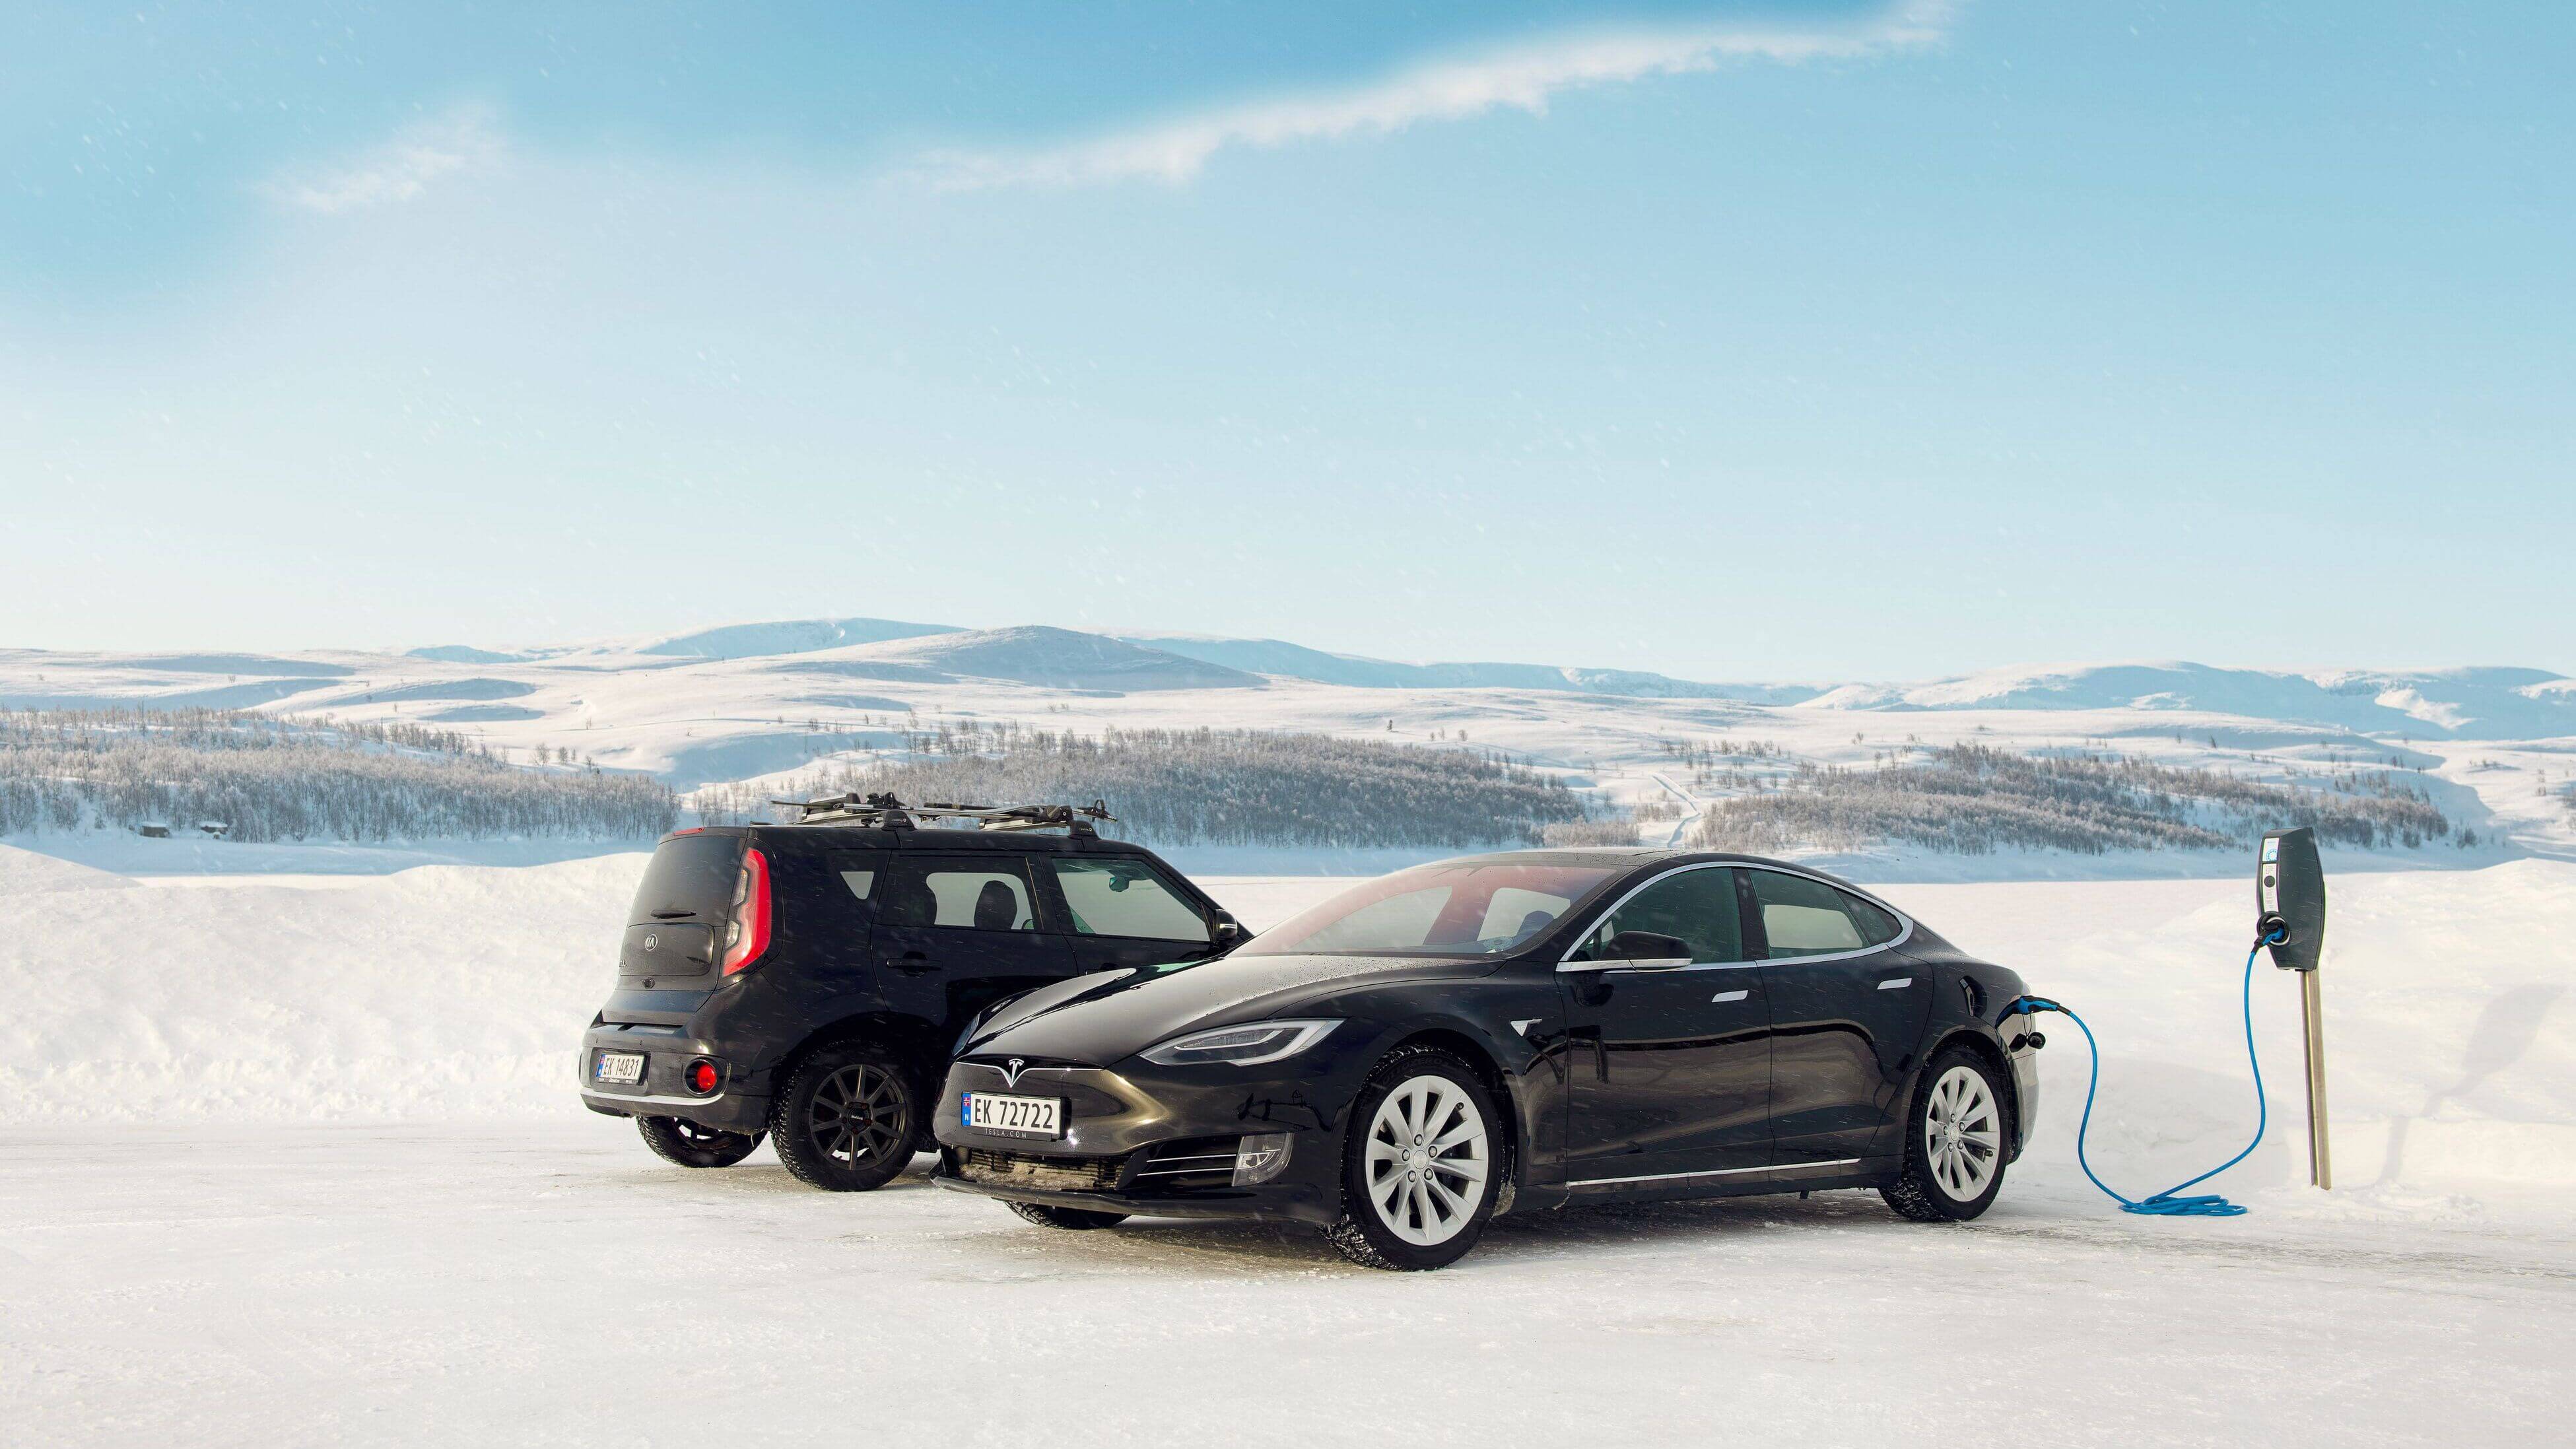 An EVBox BuisnessLine next to two cars in the snow in Norway